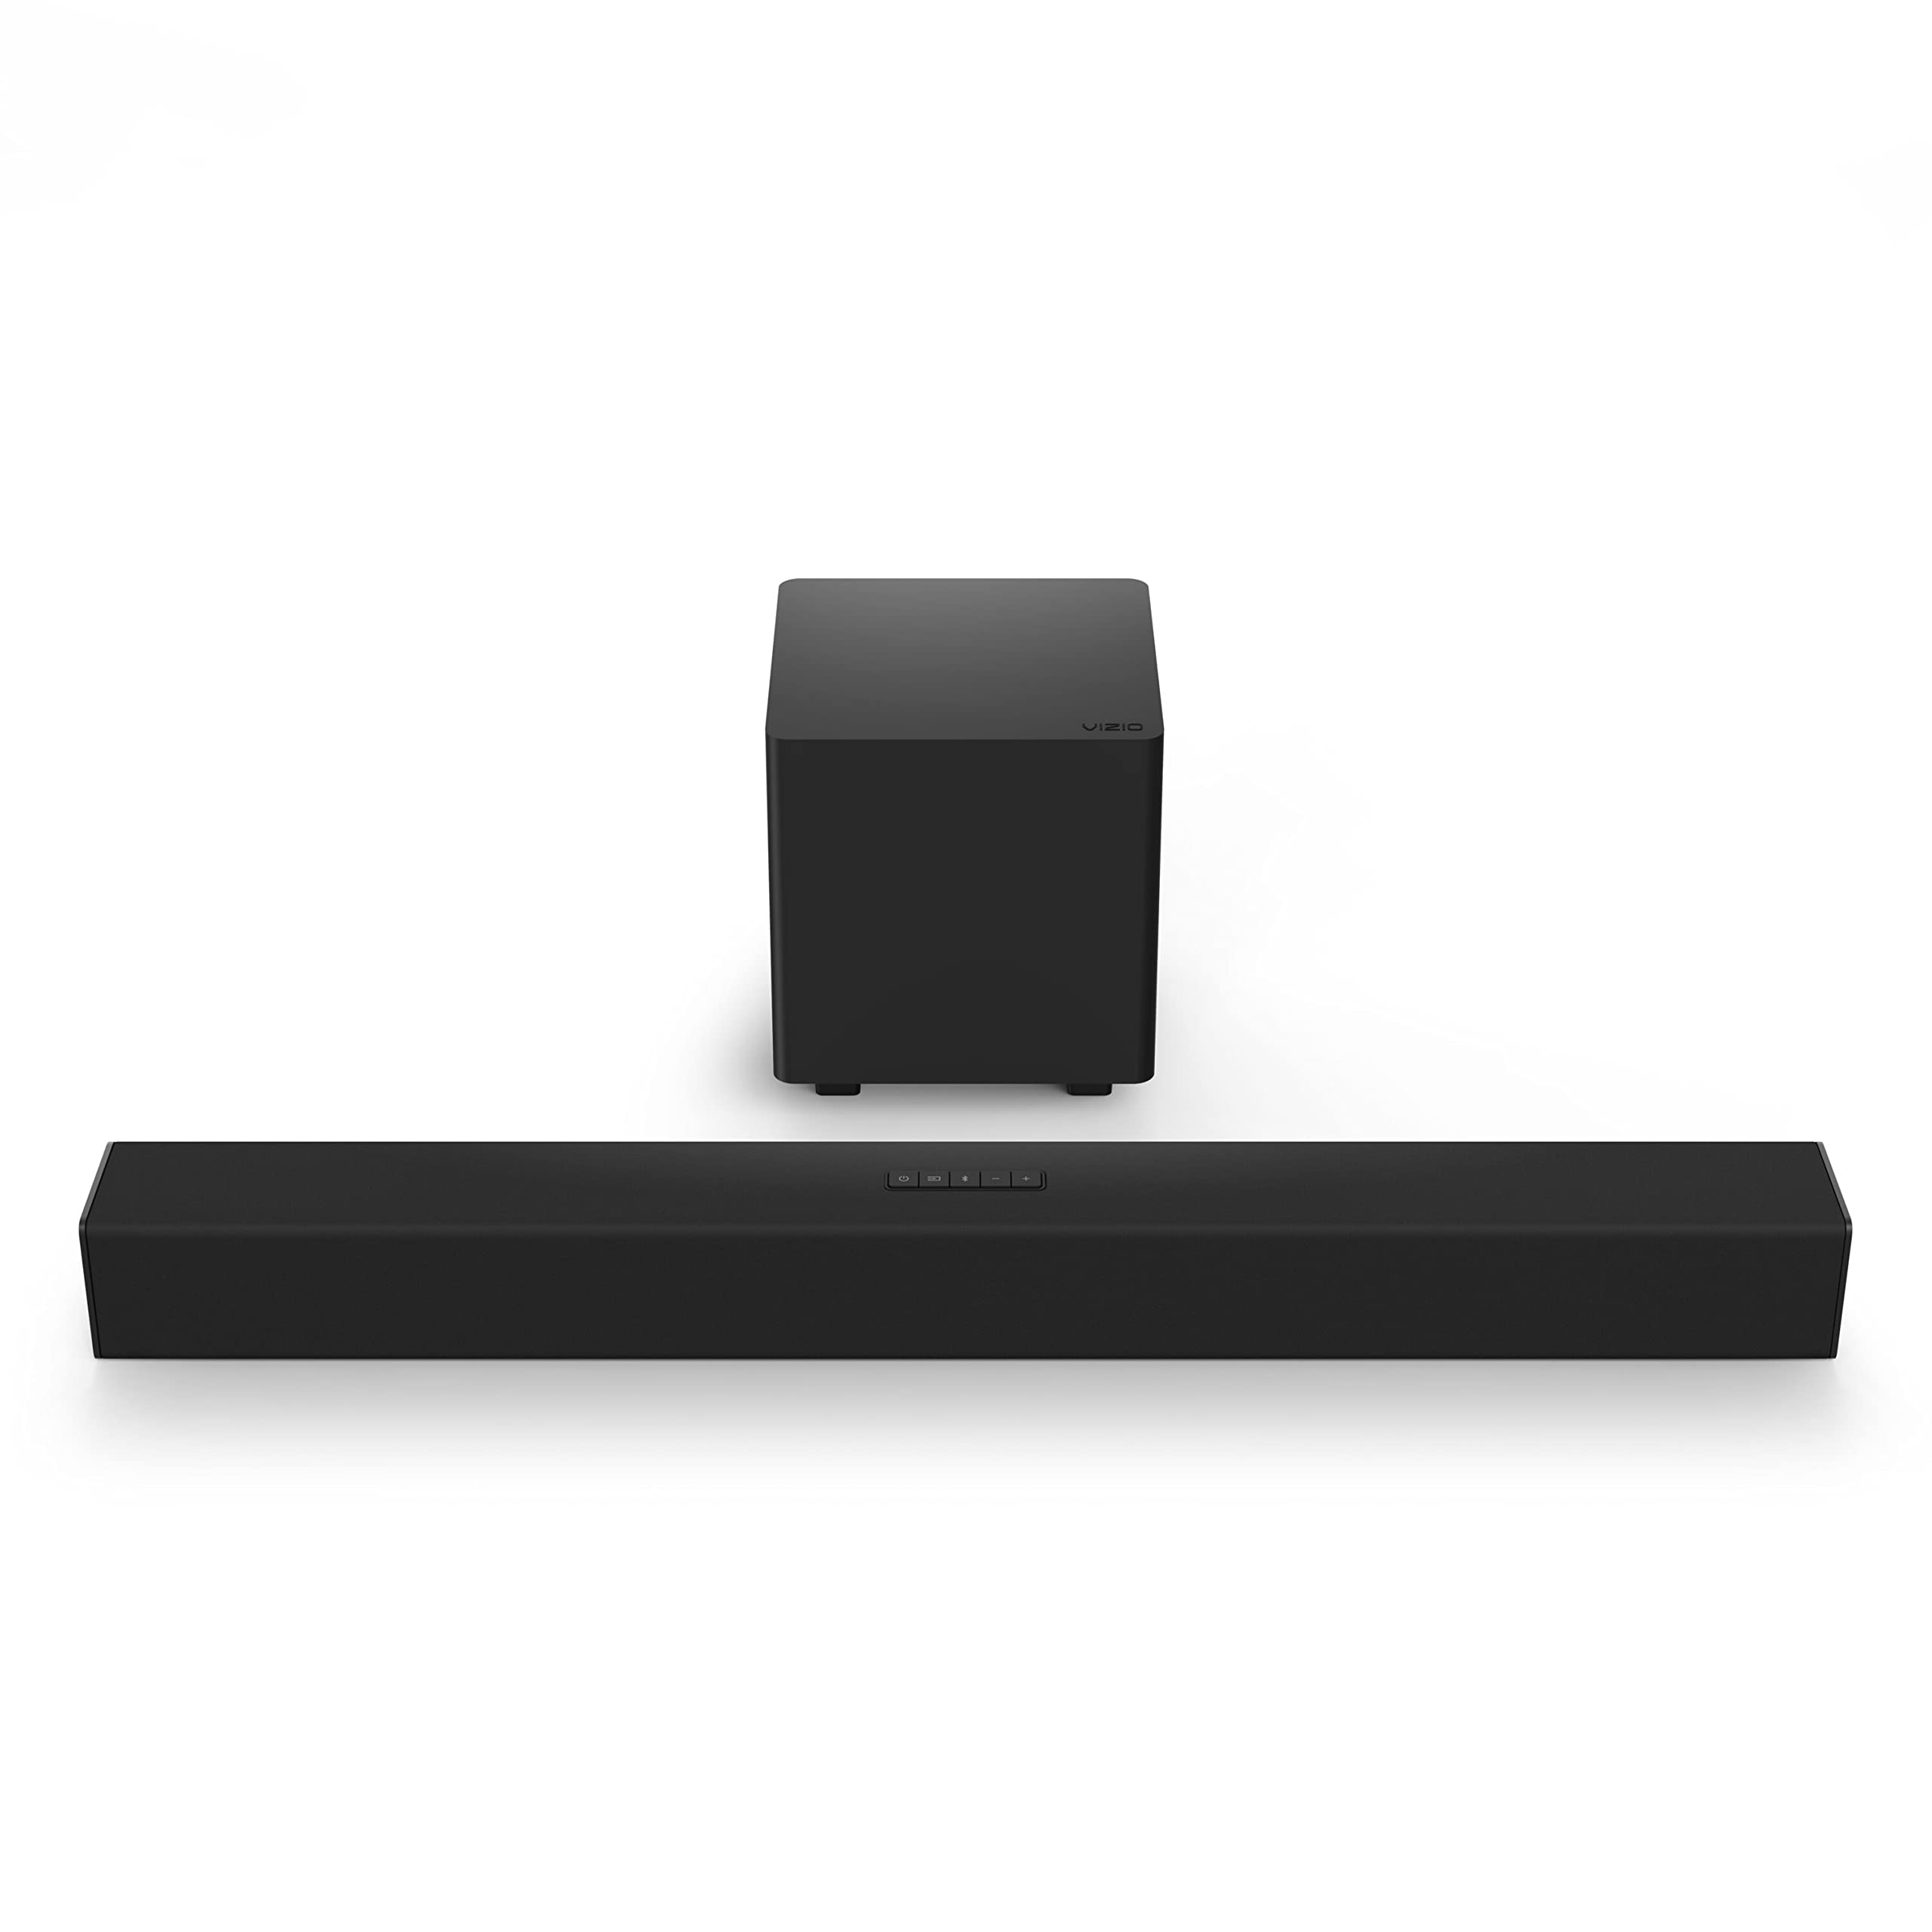 VIZIO 2.1 Home Theater Sound Bar with DTS Virtual:X, Wi...